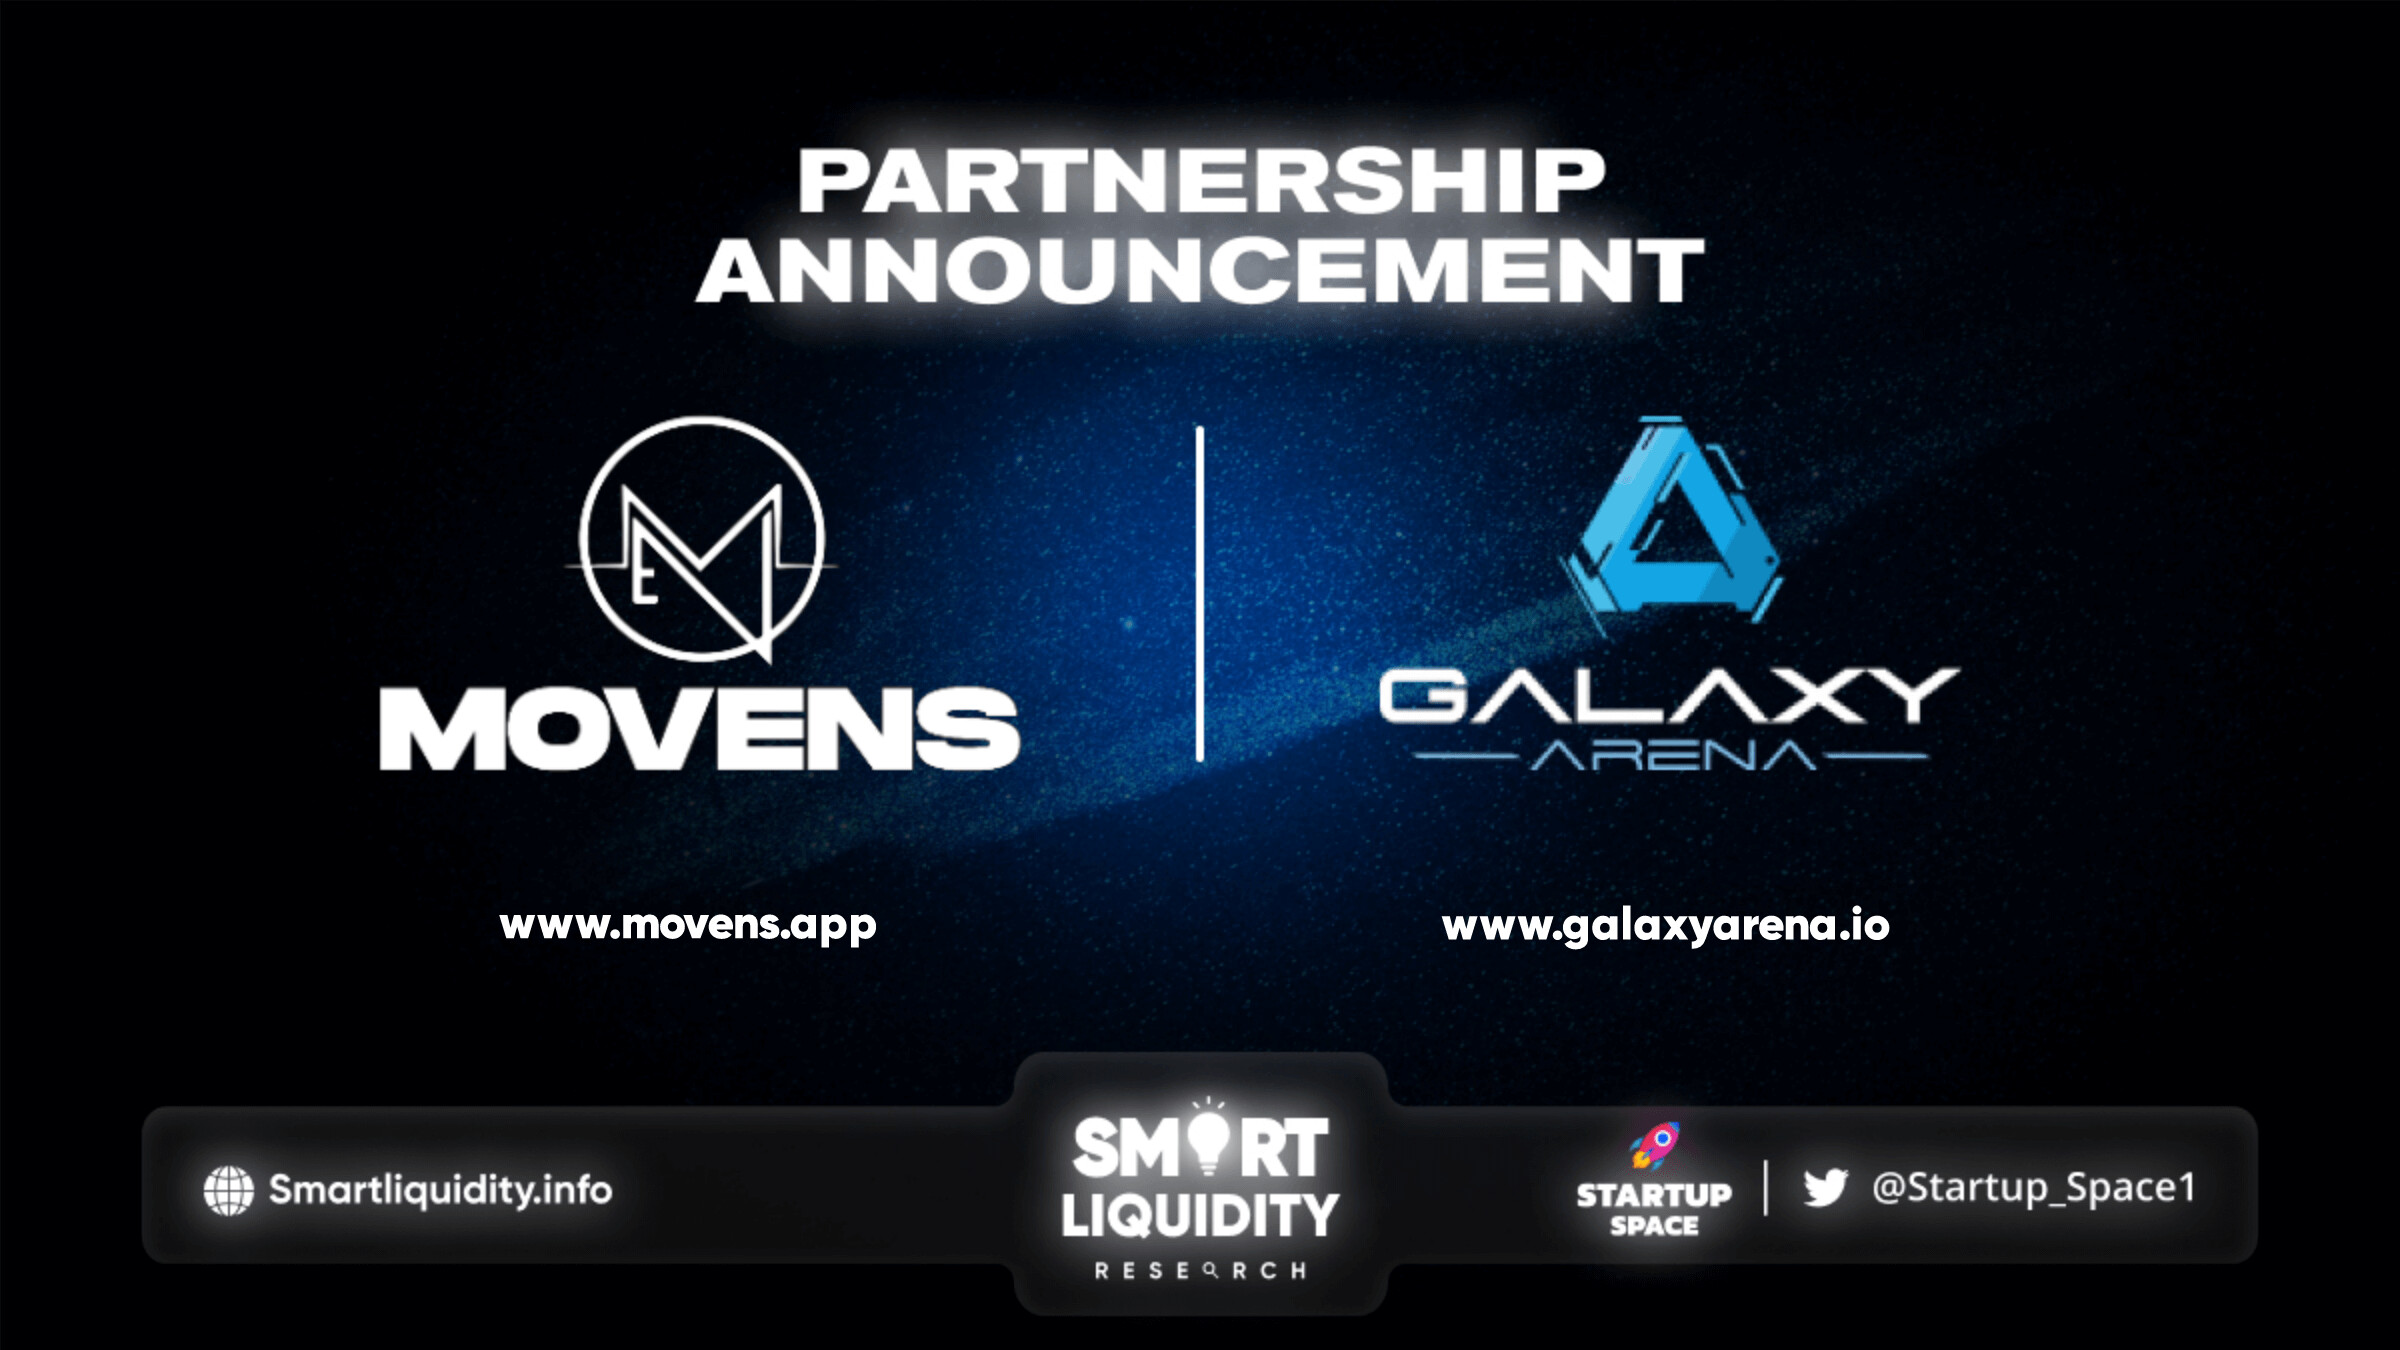 MOVENS Partnership with Galaxy Arena